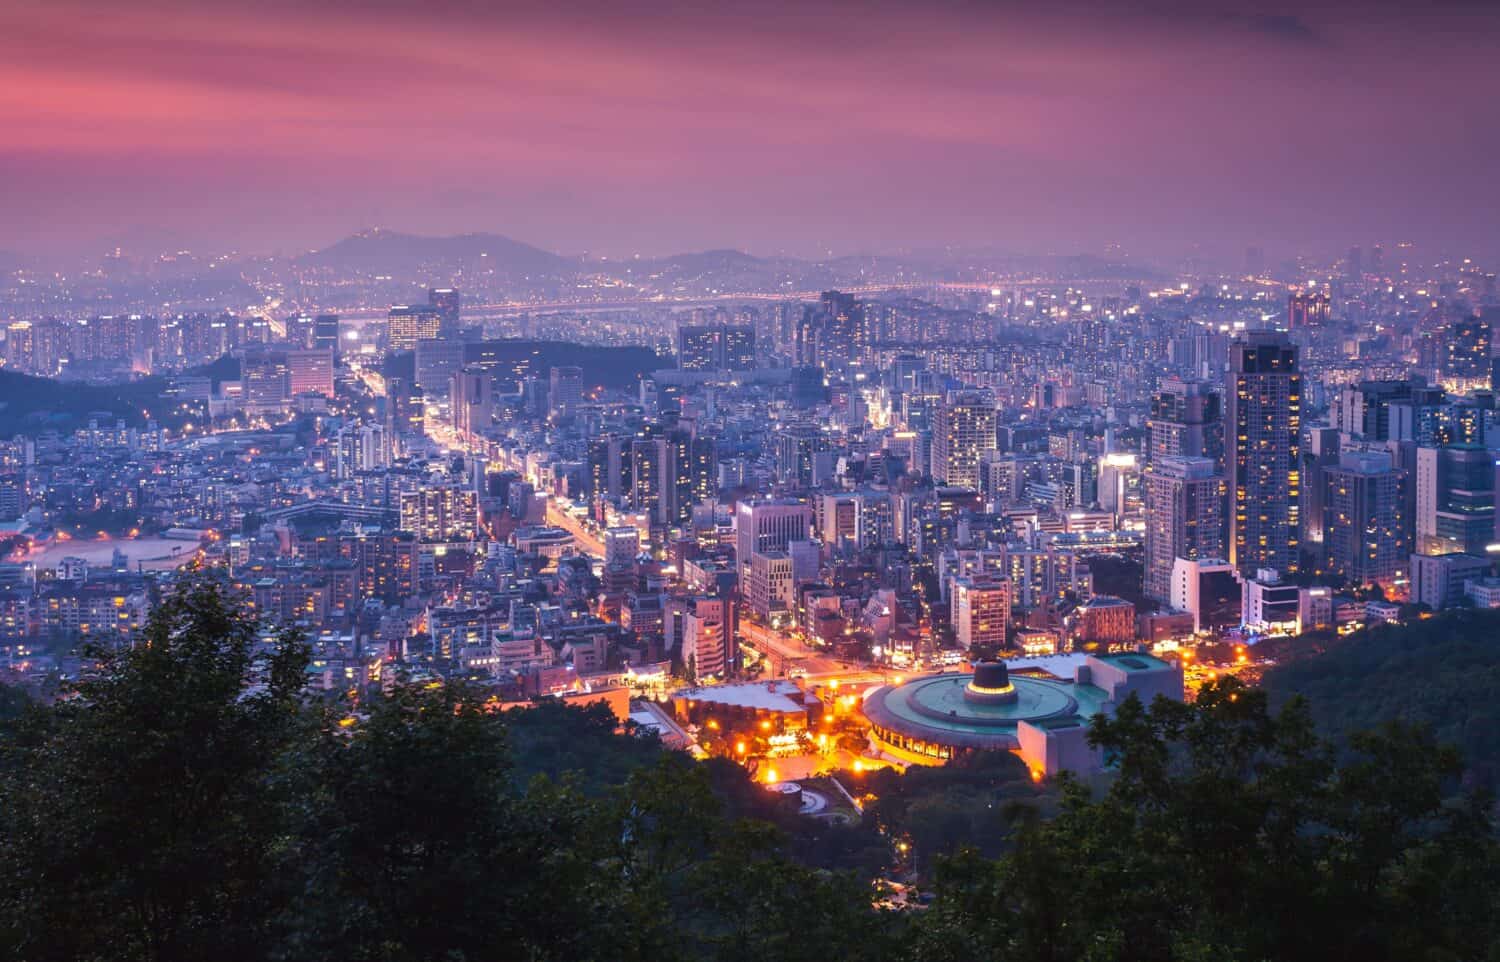 Seoul City skyline and downtown and skyscraper at night is The best view and beautiful of South Korea at Namhansanseong mountain.